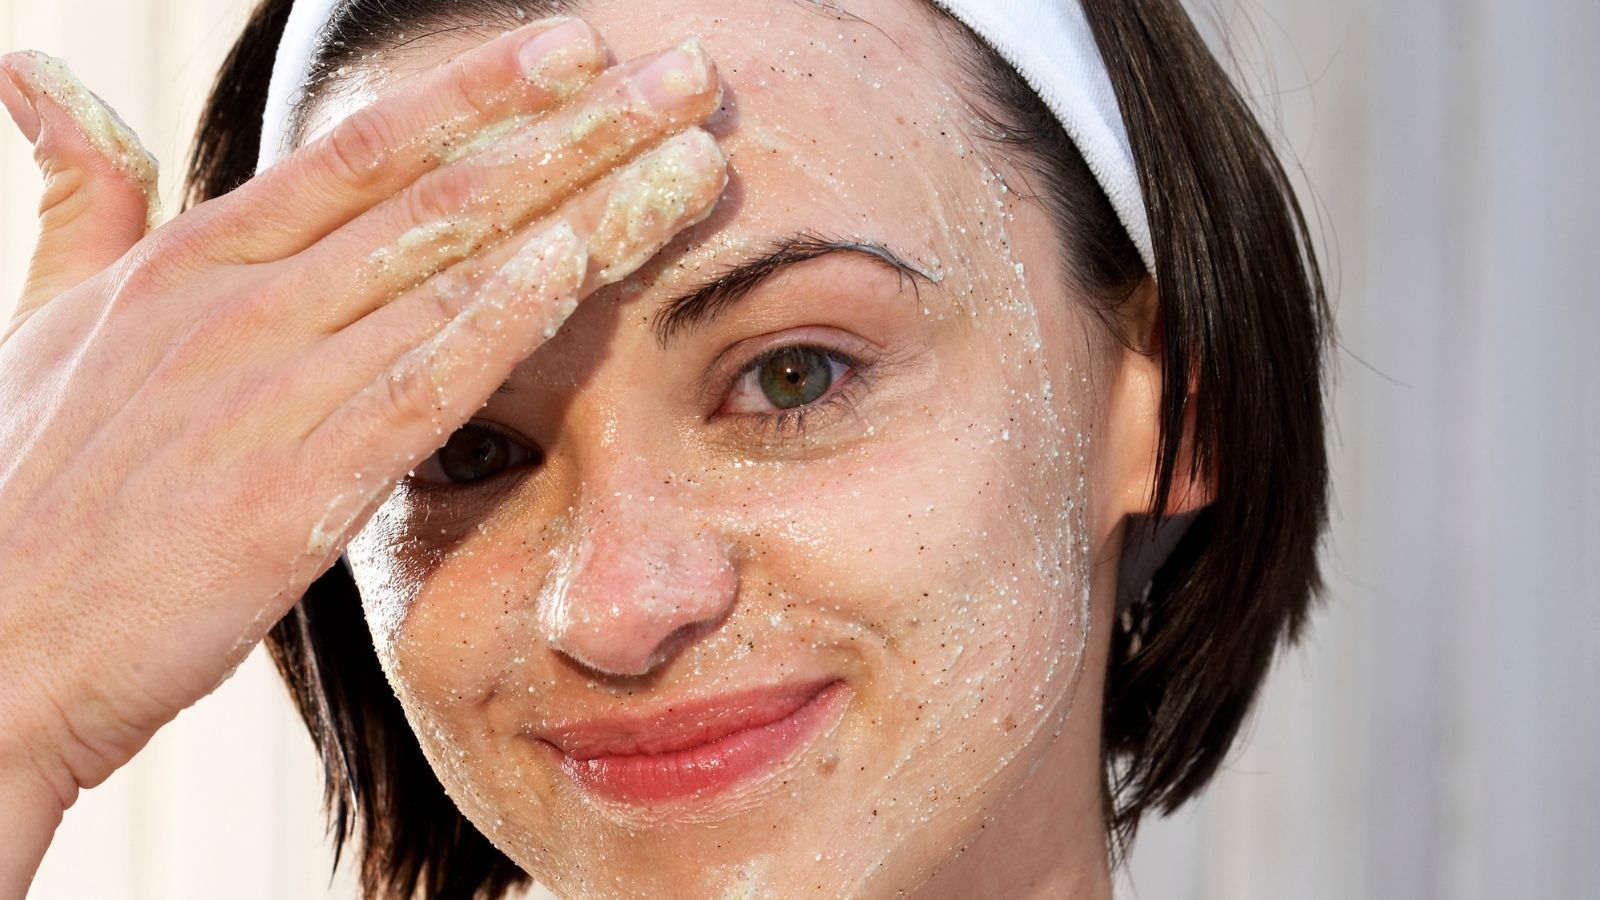 at-home facial exfoliation for glowing skin